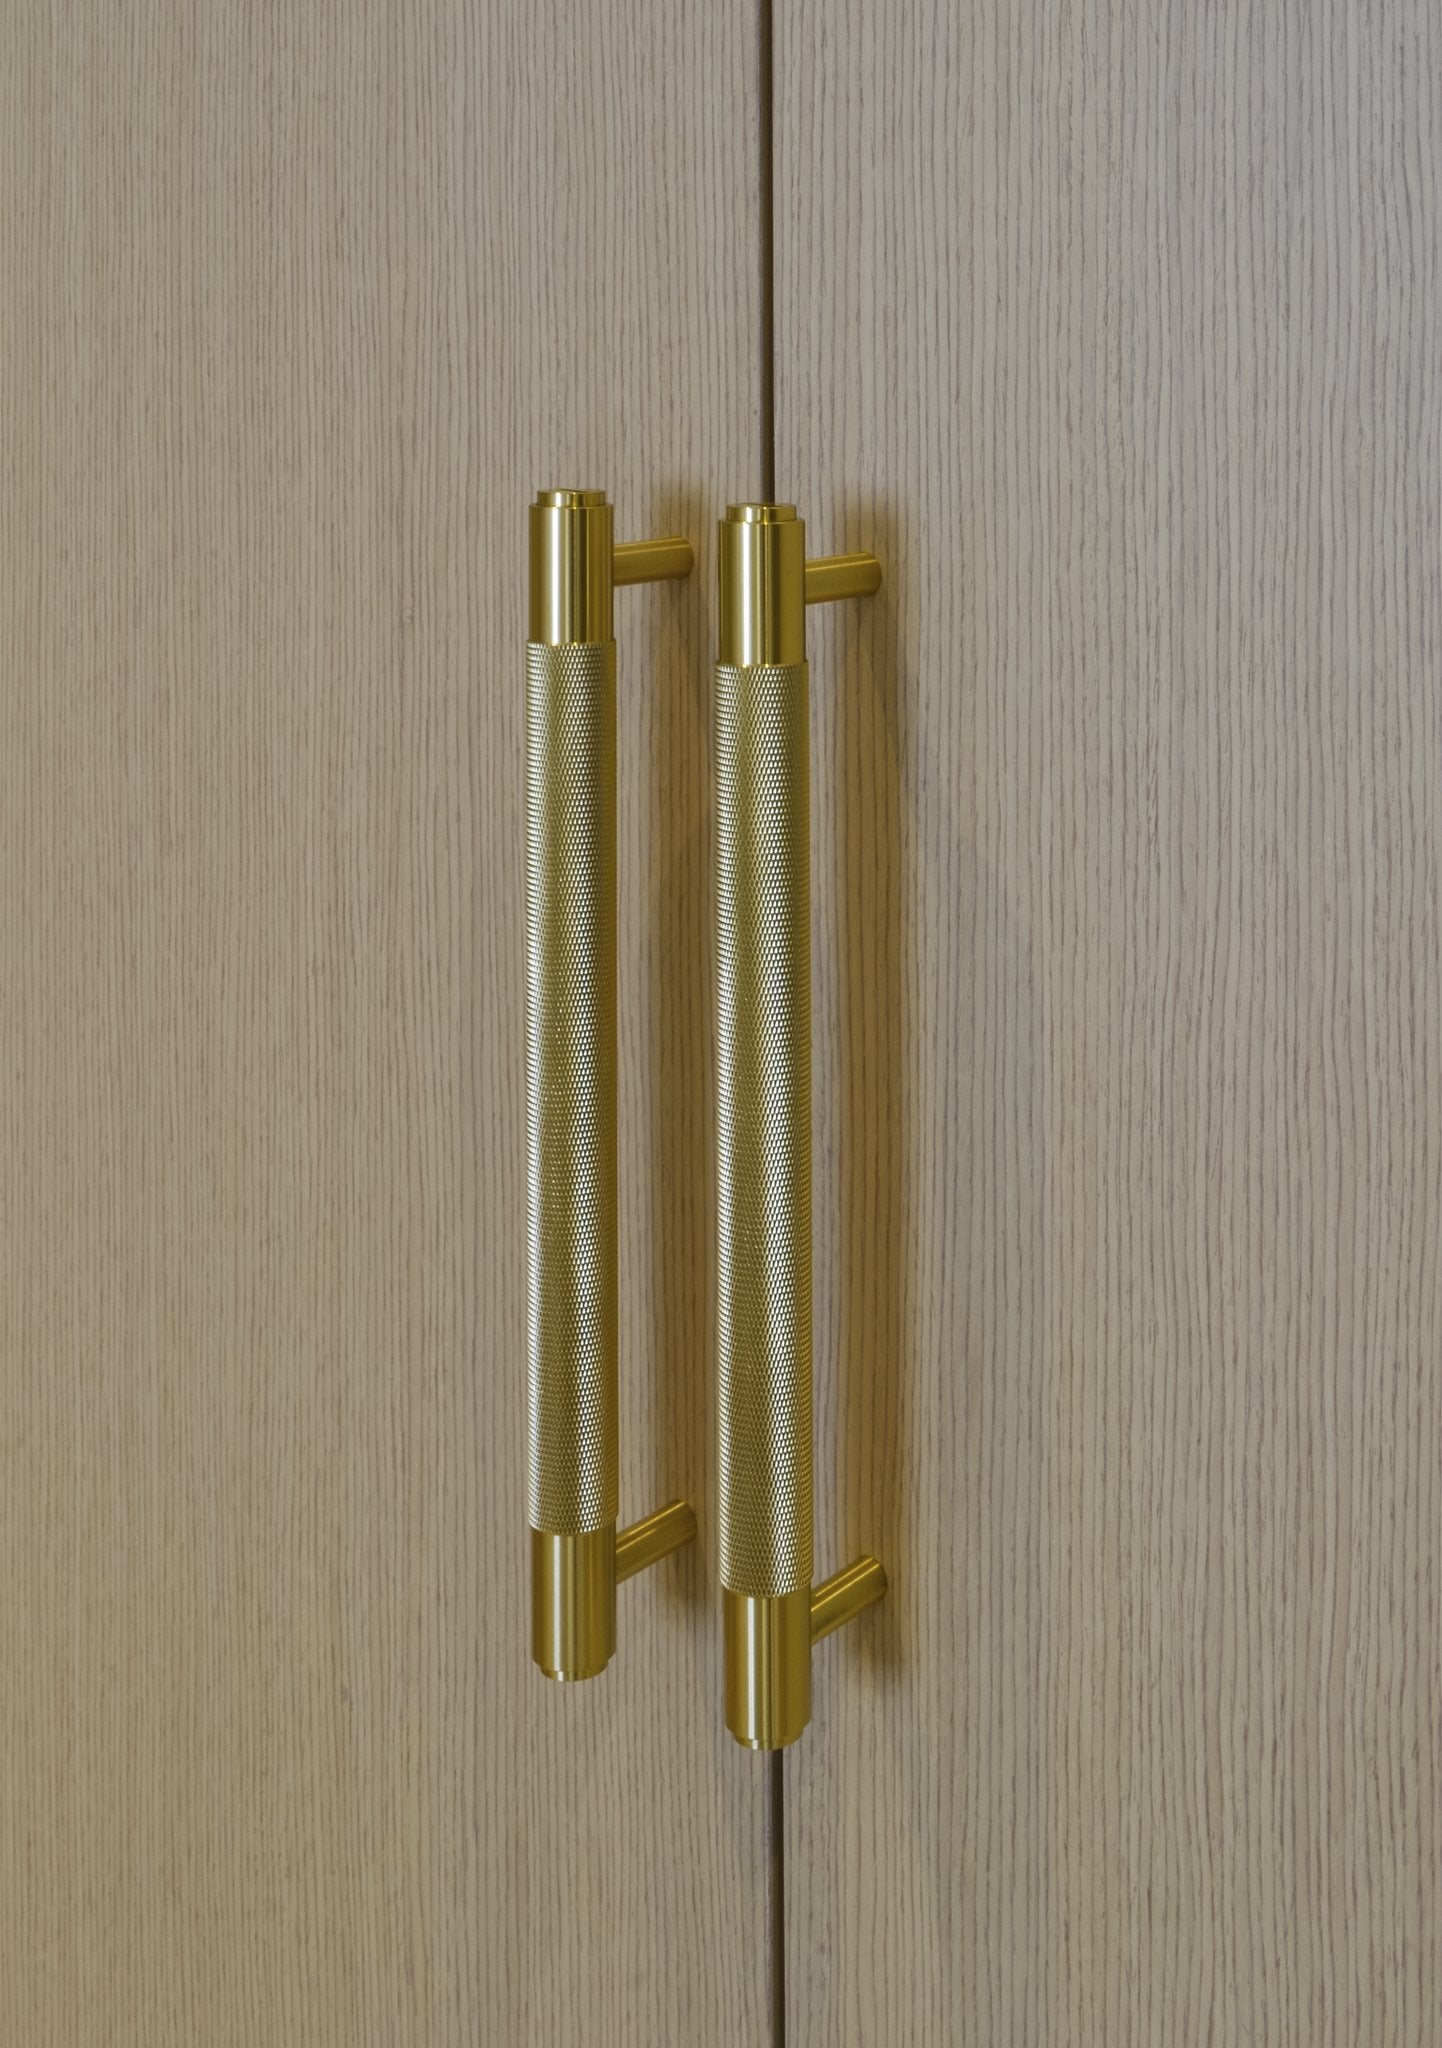 Double Hanging Fitted Wardrobe - Brass Handles - Bespoke built-in wardrobe design. Fitted Wardrobe. Design, manufacture and installation service. Wardrobe door made from Oak veneered MDF. Wardrobe interior made from MFC in linen texture finish. Wardrobe i